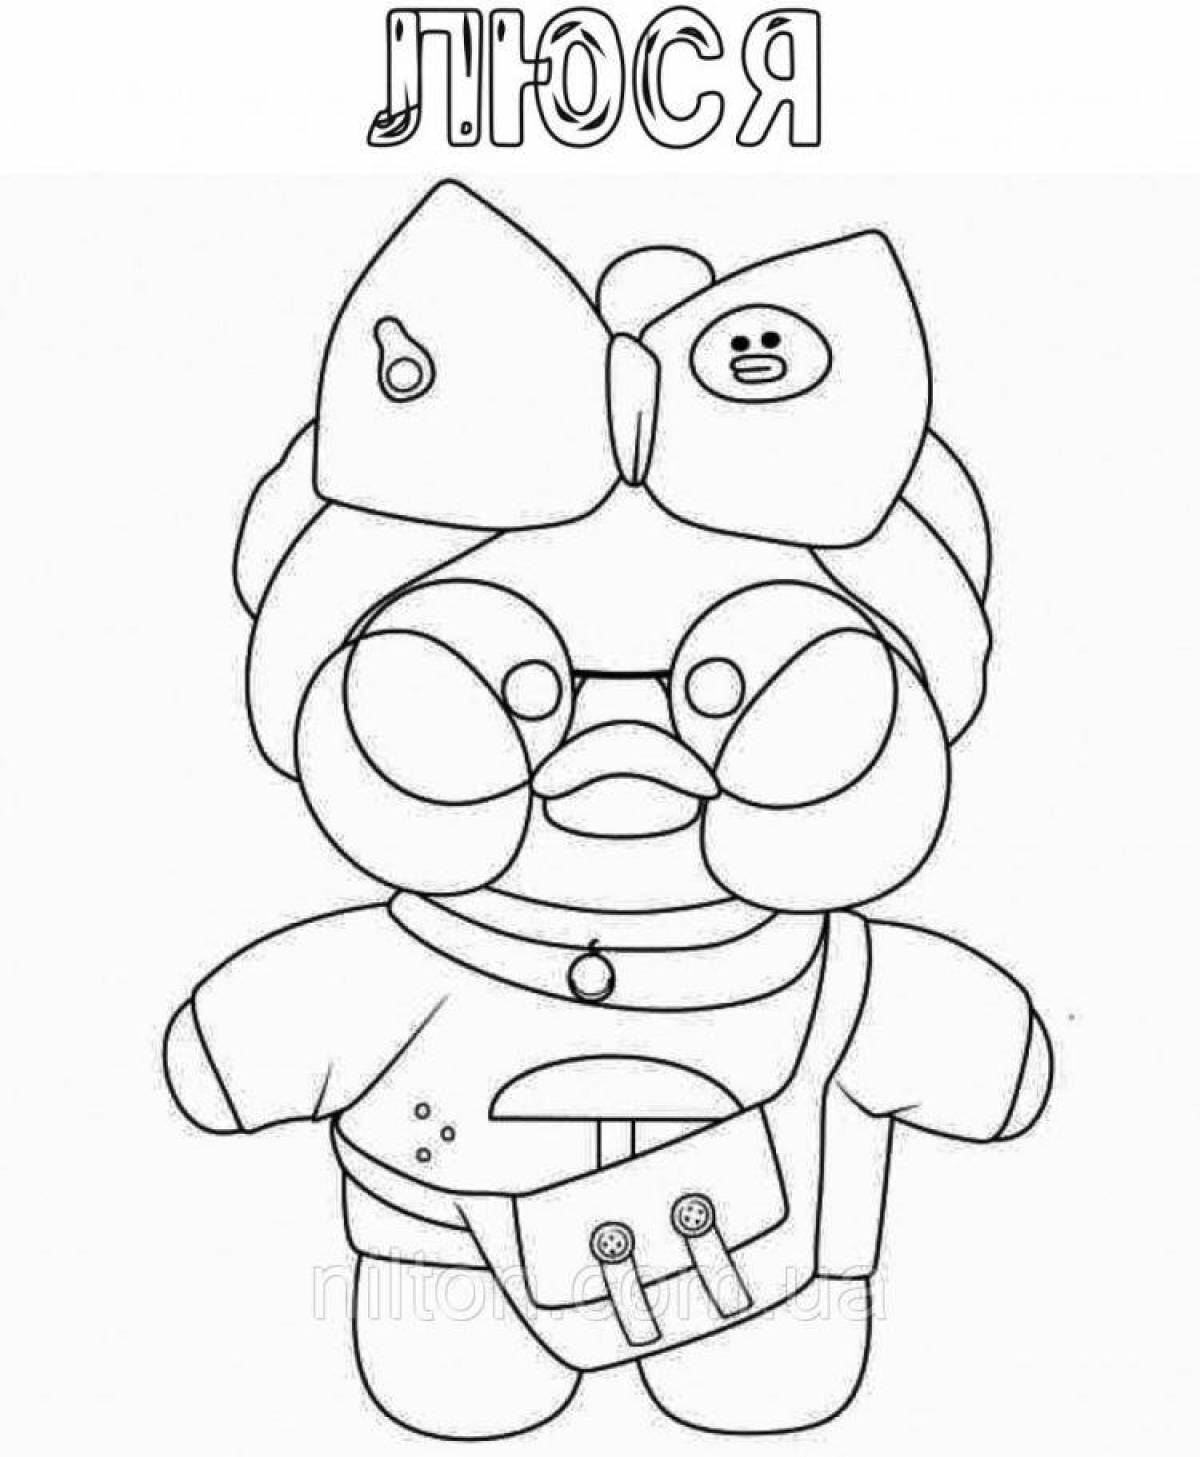 Coloring page charming duck lalalafanfan